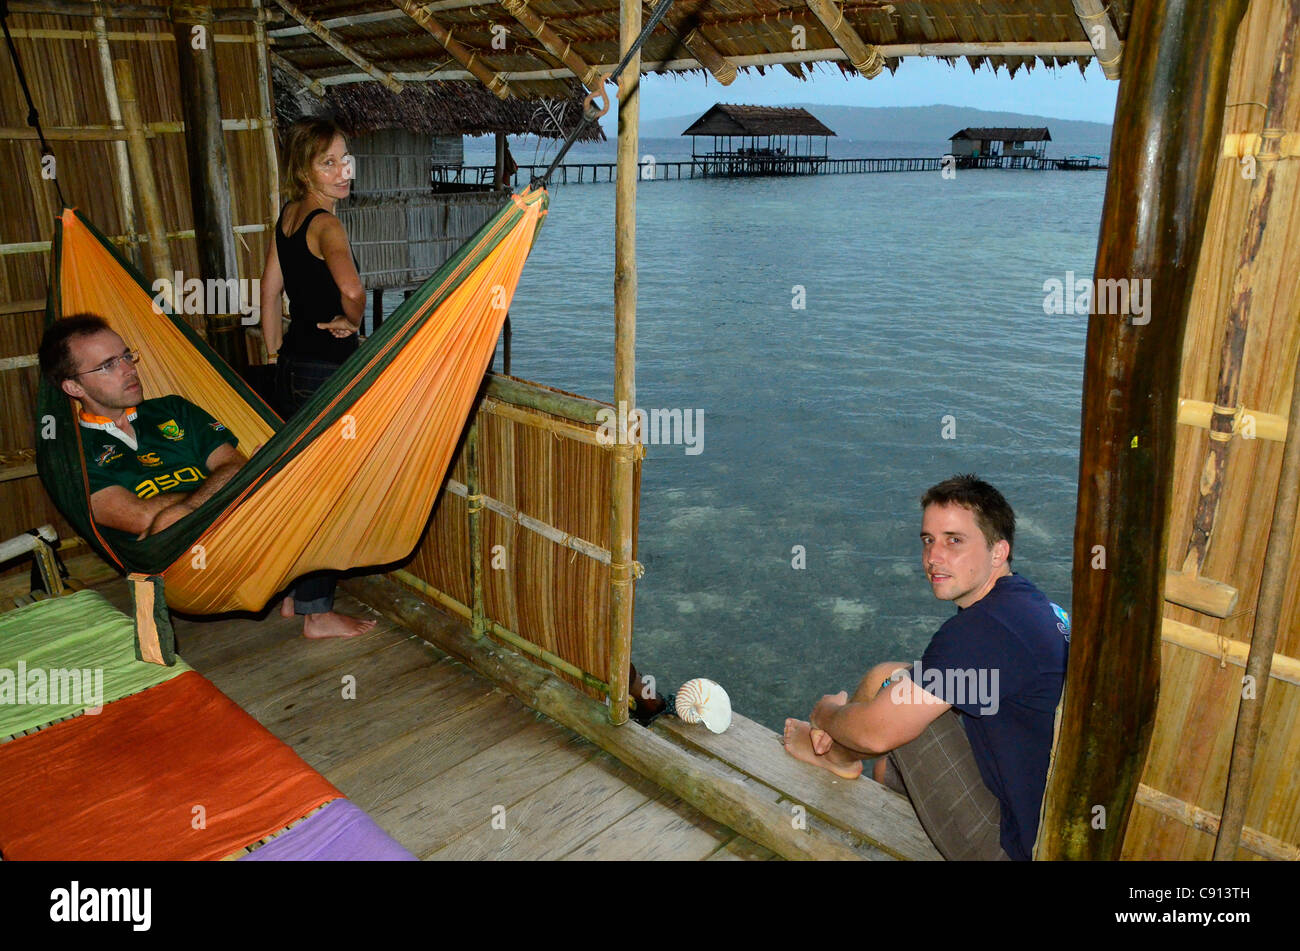 Kri Eco Resort accommodation, Raja Ampat islands of Western Papua in the Pacific Ocean, Indonesia. Stock Photo